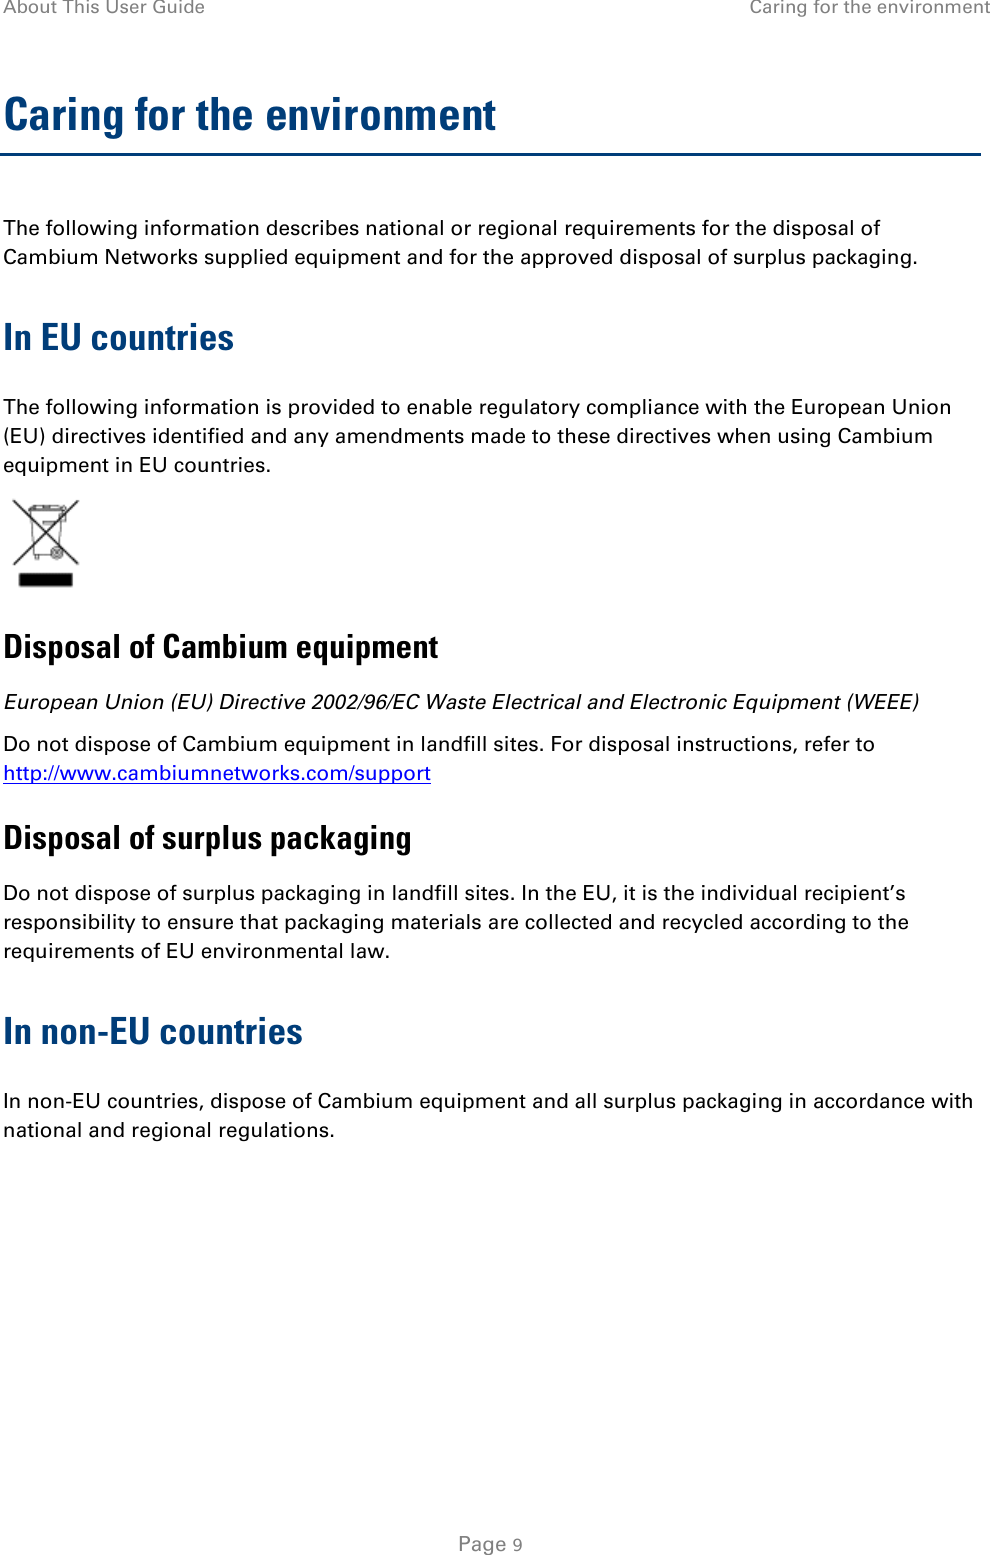 About This User Guide Caring for the environment  Caring for the environment The following information describes national or regional requirements for the disposal of Cambium Networks supplied equipment and for the approved disposal of surplus packaging. In EU countries The following information is provided to enable regulatory compliance with the European Union (EU) directives identified and any amendments made to these directives when using Cambium equipment in EU countries.  Disposal of Cambium equipment European Union (EU) Directive 2002/96/EC Waste Electrical and Electronic Equipment (WEEE) Do not dispose of Cambium equipment in landfill sites. For disposal instructions, refer to http://www.cambiumnetworks.com/support Disposal of surplus packaging Do not dispose of surplus packaging in landfill sites. In the EU, it is the individual recipient’s responsibility to ensure that packaging materials are collected and recycled according to the requirements of EU environmental law. In non-EU countries In non-EU countries, dispose of Cambium equipment and all surplus packaging in accordance with national and regional regulations.    Page 9 